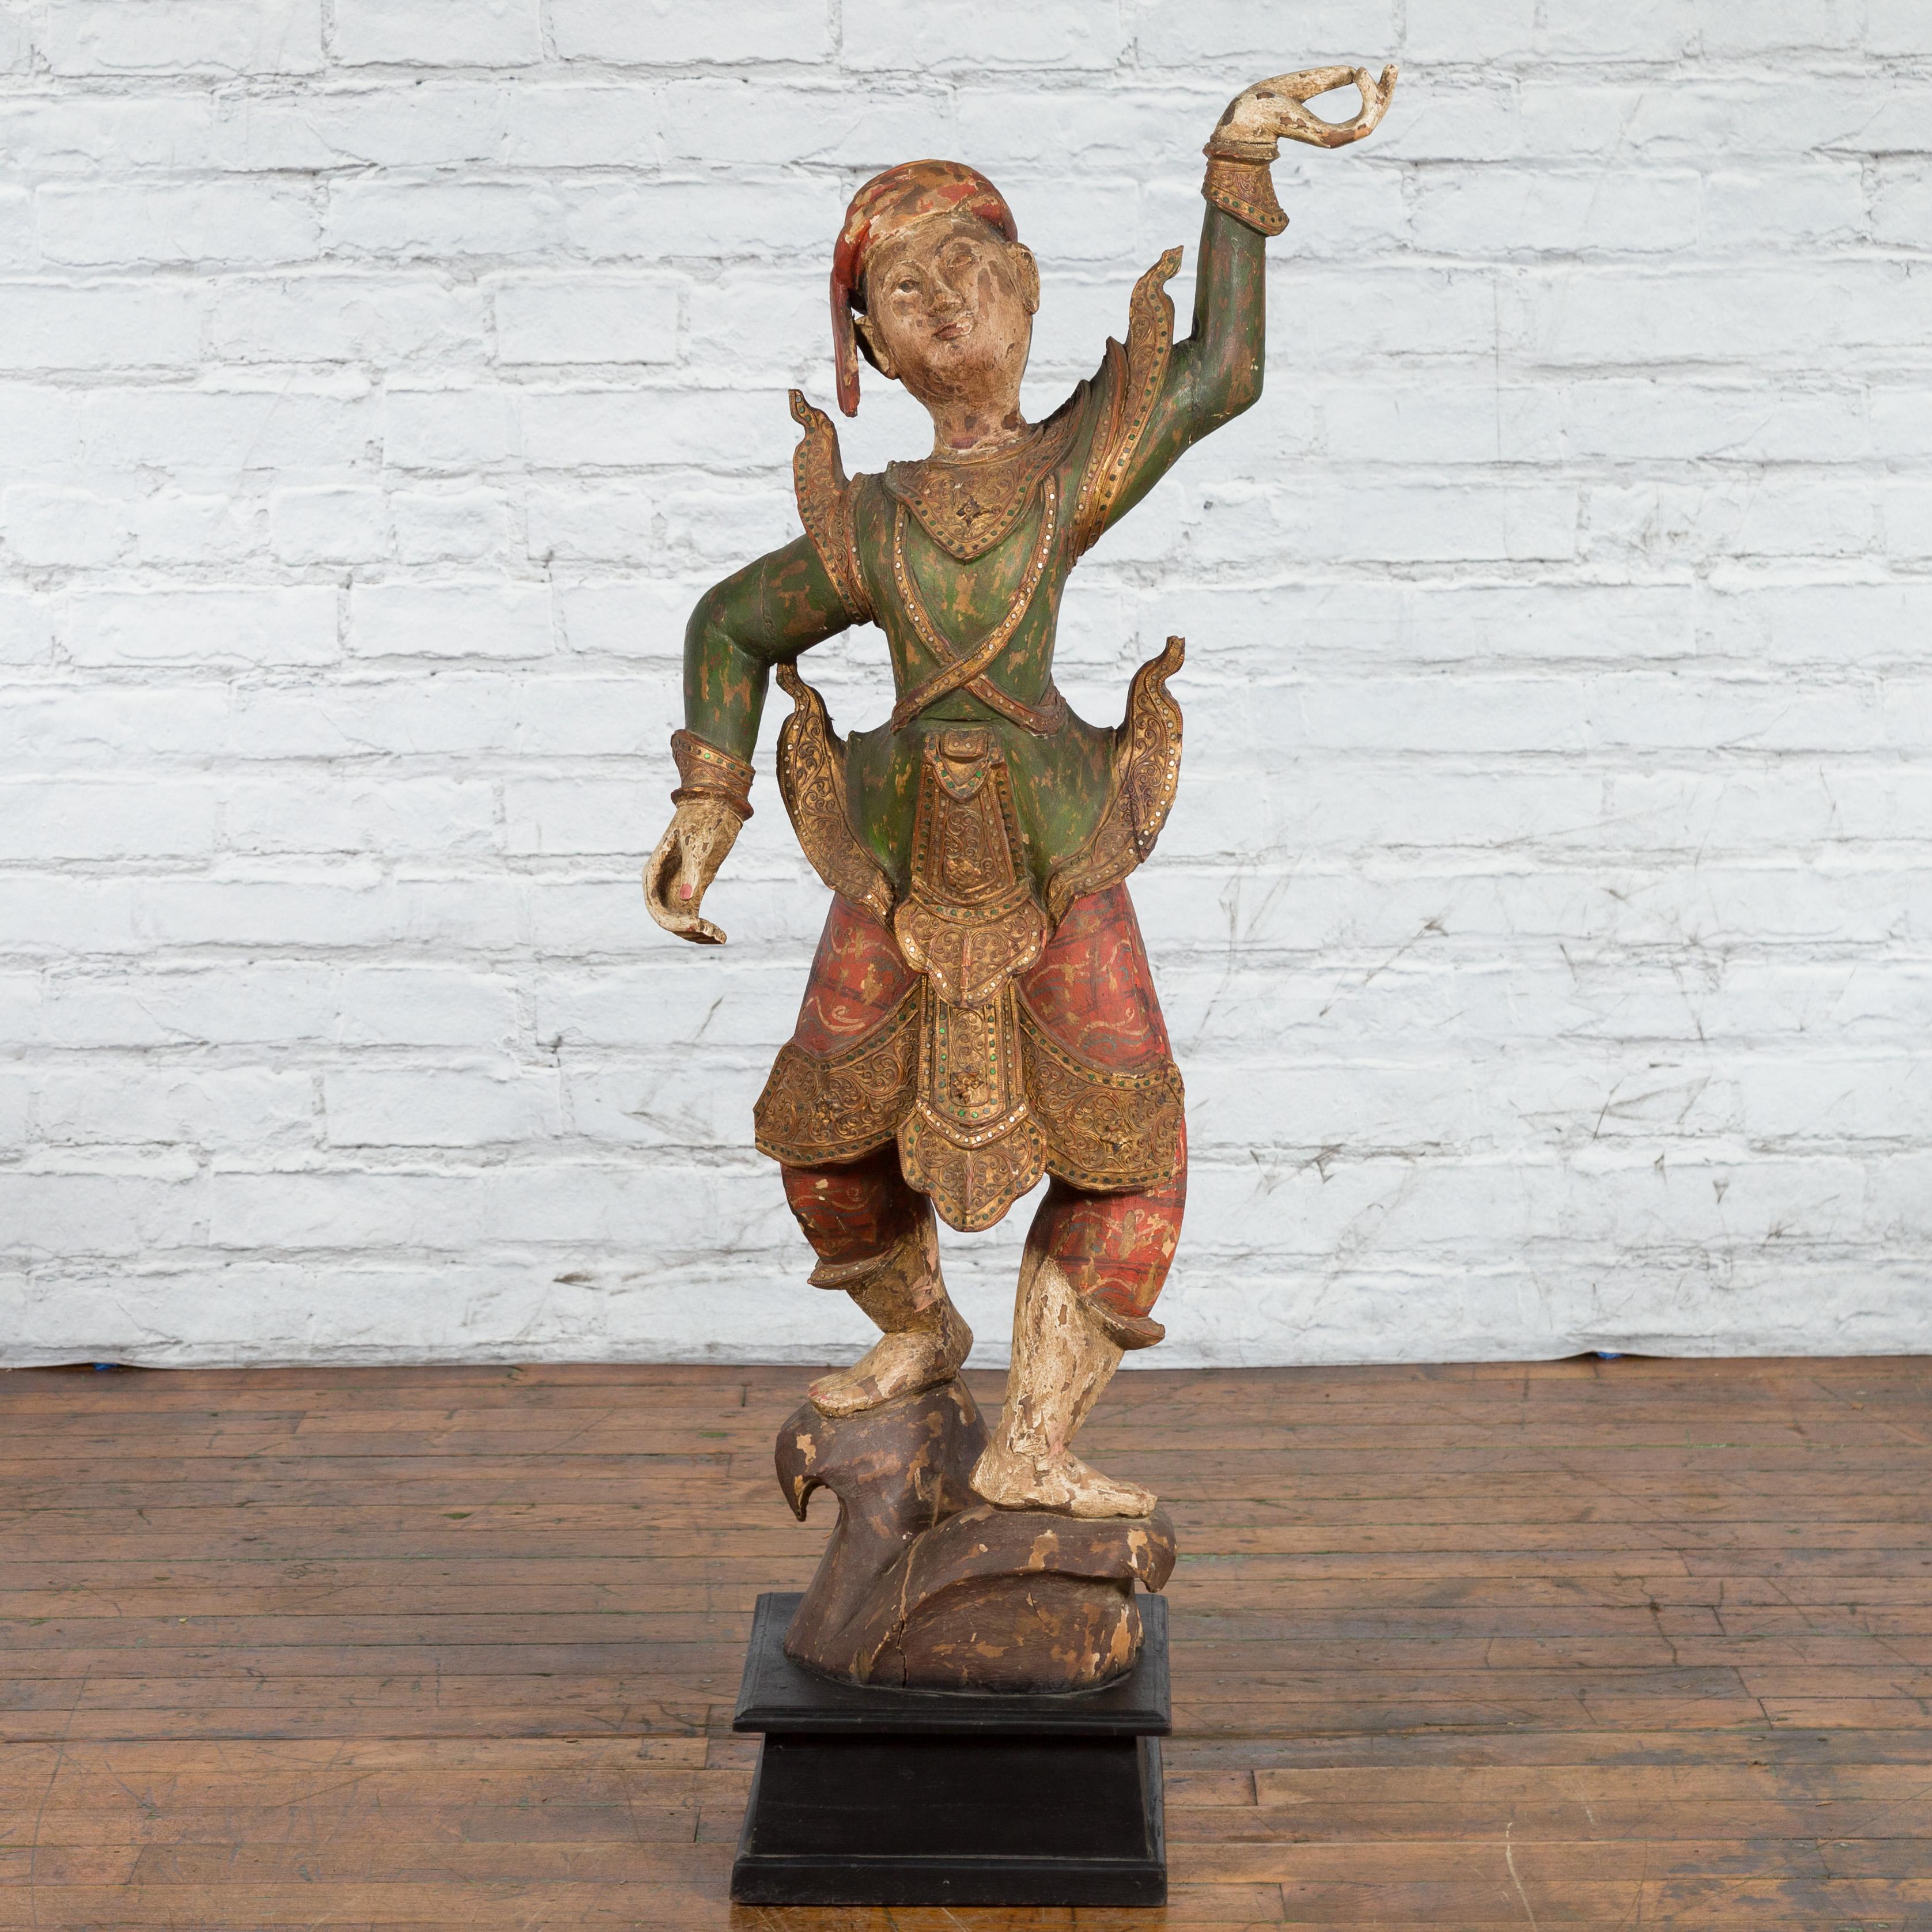 A tall antique Balinese hand-carved and painted wooden statue from the 19th century on black base. Hand-made on the island of Bali, Southern Indonesia during the 19th century, this wooden sculpture captures our attention with its lively attitude and